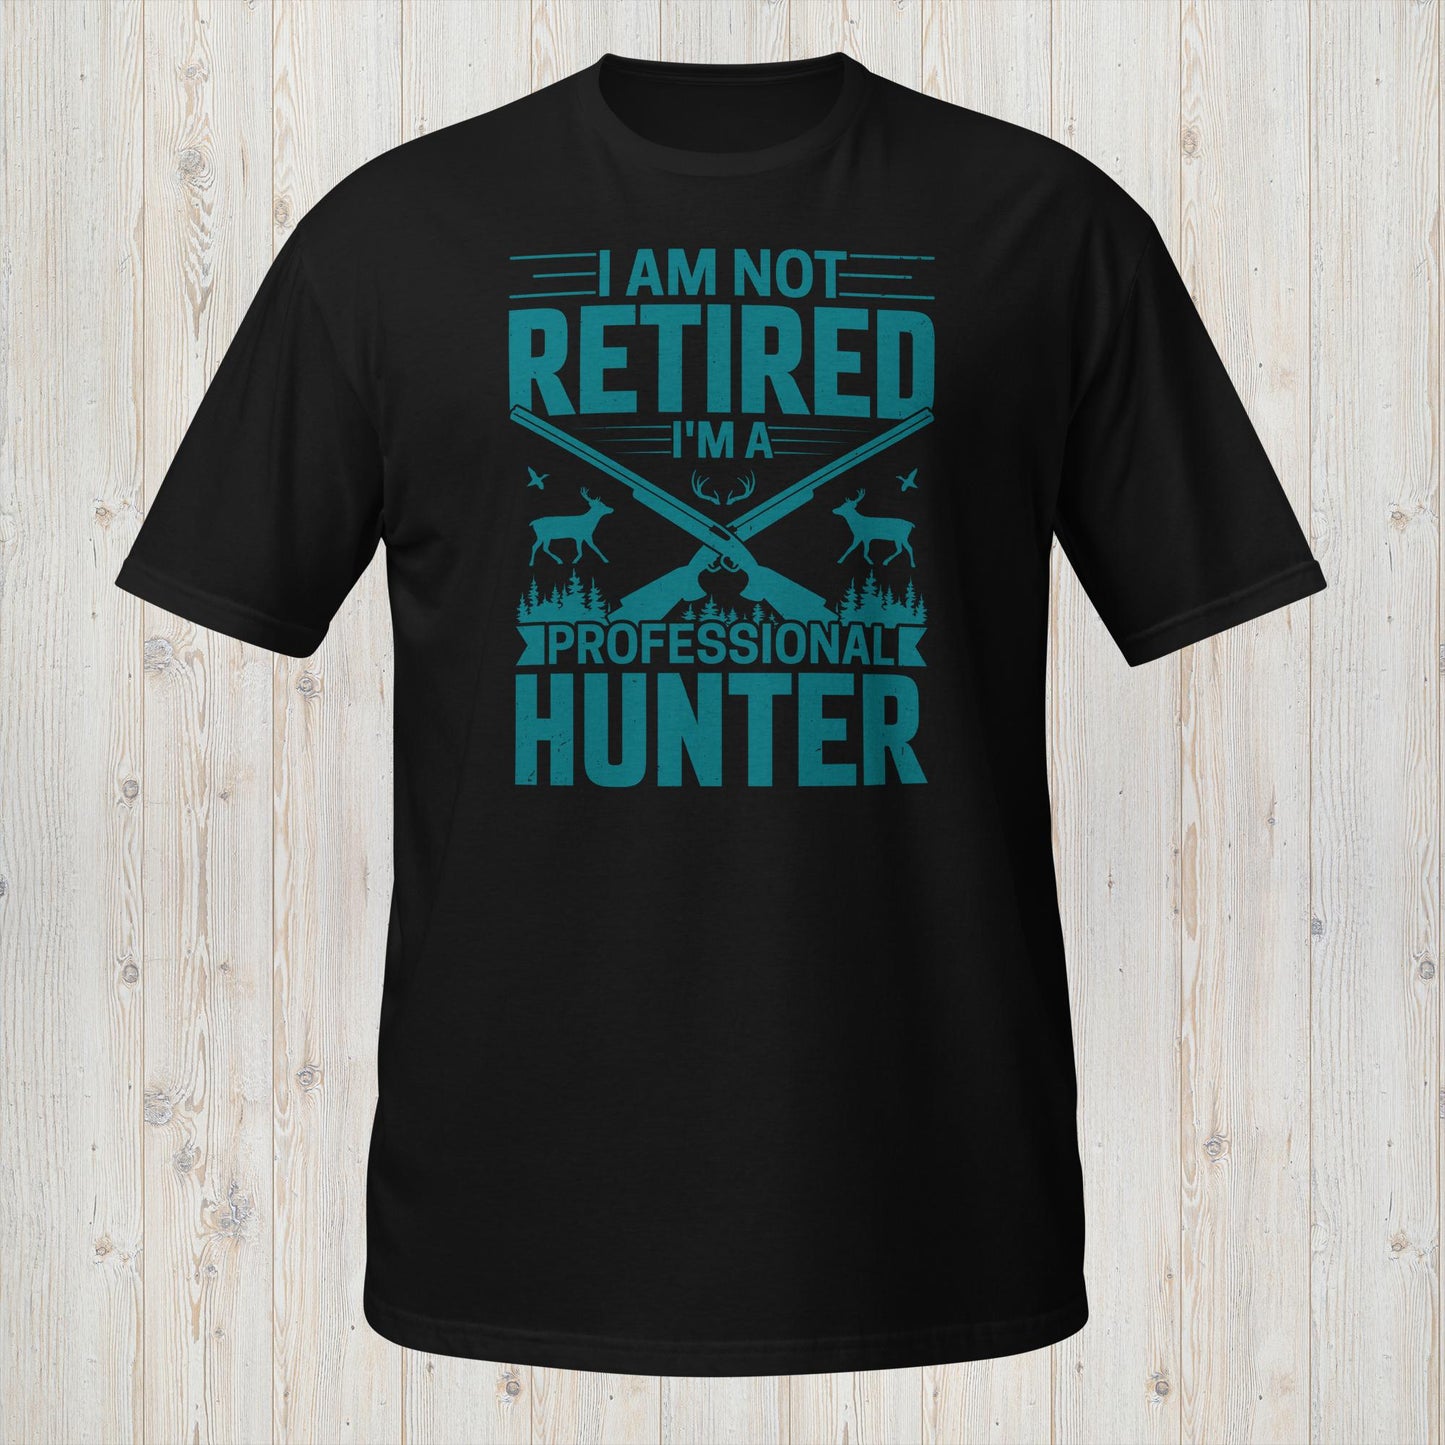 Professional Hunter Tee - Declare Your Passion for the Hunt